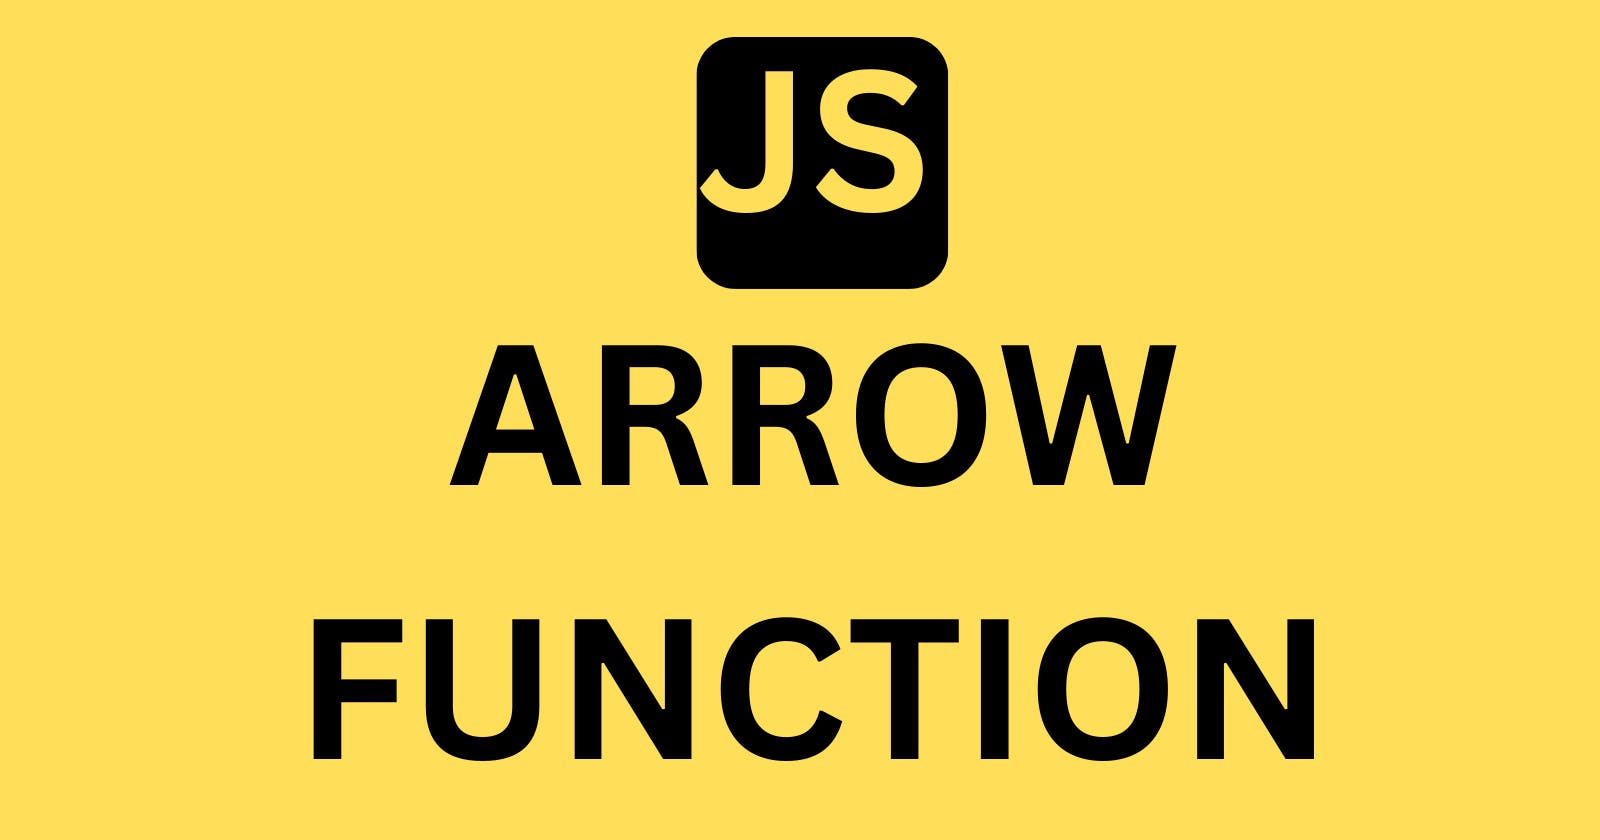 JavaScript Arrow Function Explained For Absolute Beginners